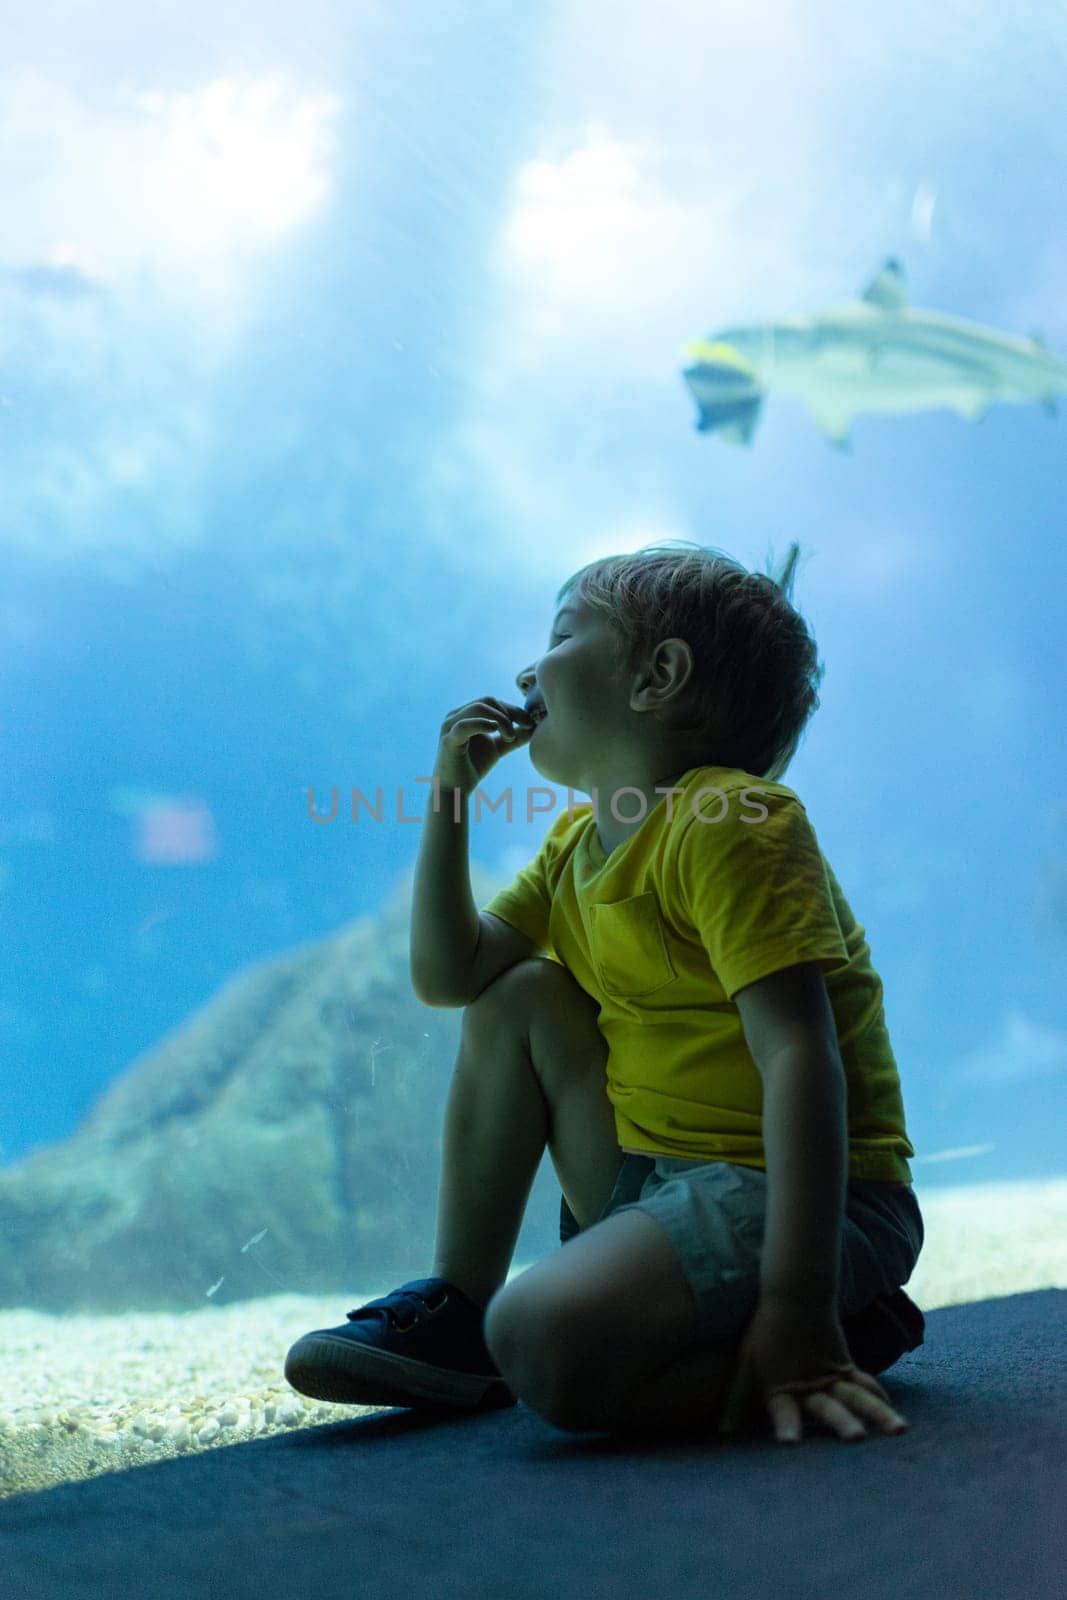 A young boy is sitting on the floor in front of a fish tank - aquarium in oceanarium. He is eating a snack while looking at the fish in the tank